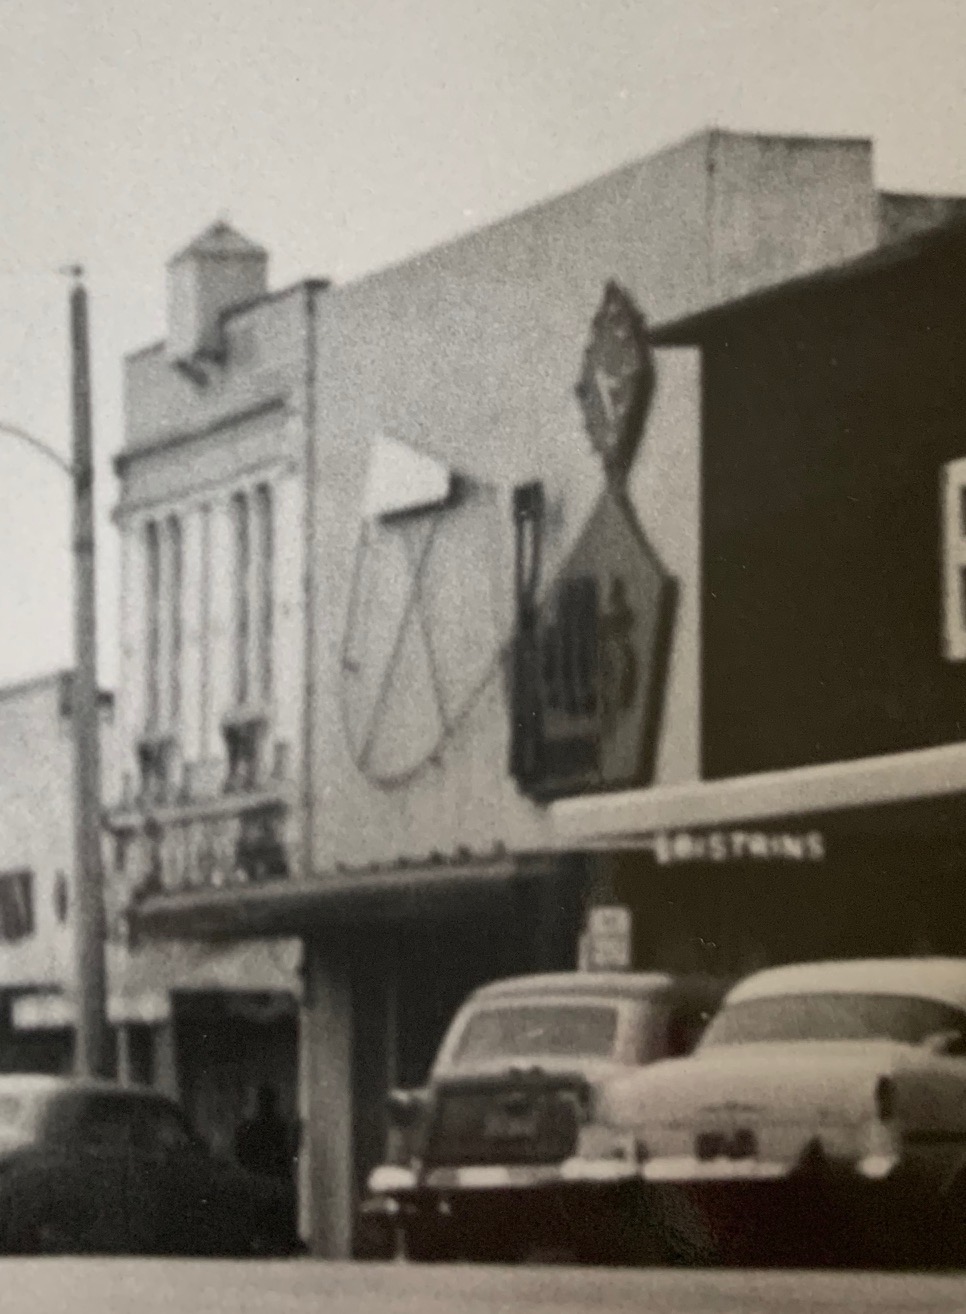 Bank of Arcata building in the 1950s